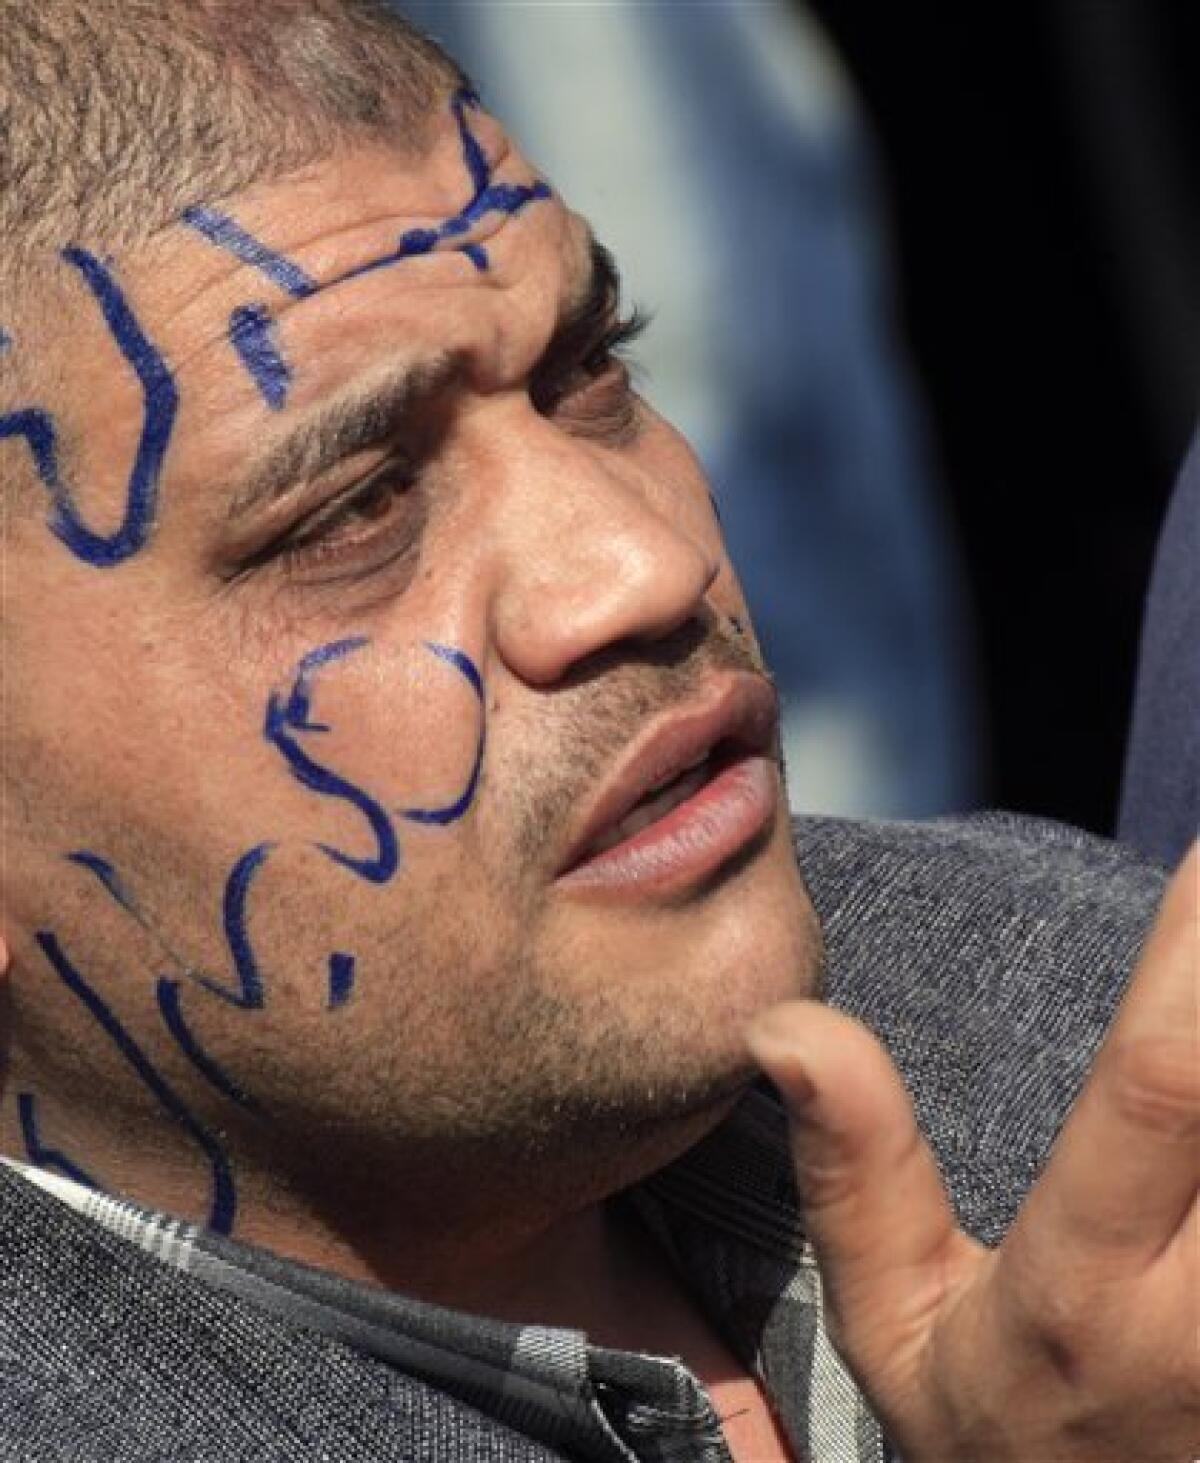 An Egyptian pro-Mubarak supporter with "Mubarak" written on his face prays during march in Cairo, Egypt, Tuesday, Feb. 1, 2011. Egyptian authorities battled to save President Hosni Mubarak's regime with a series of concessions and promises to protesters, but realities on the streets of Cairo may be outrunning his capacity for change. (AP Photo/Amr Nabil)